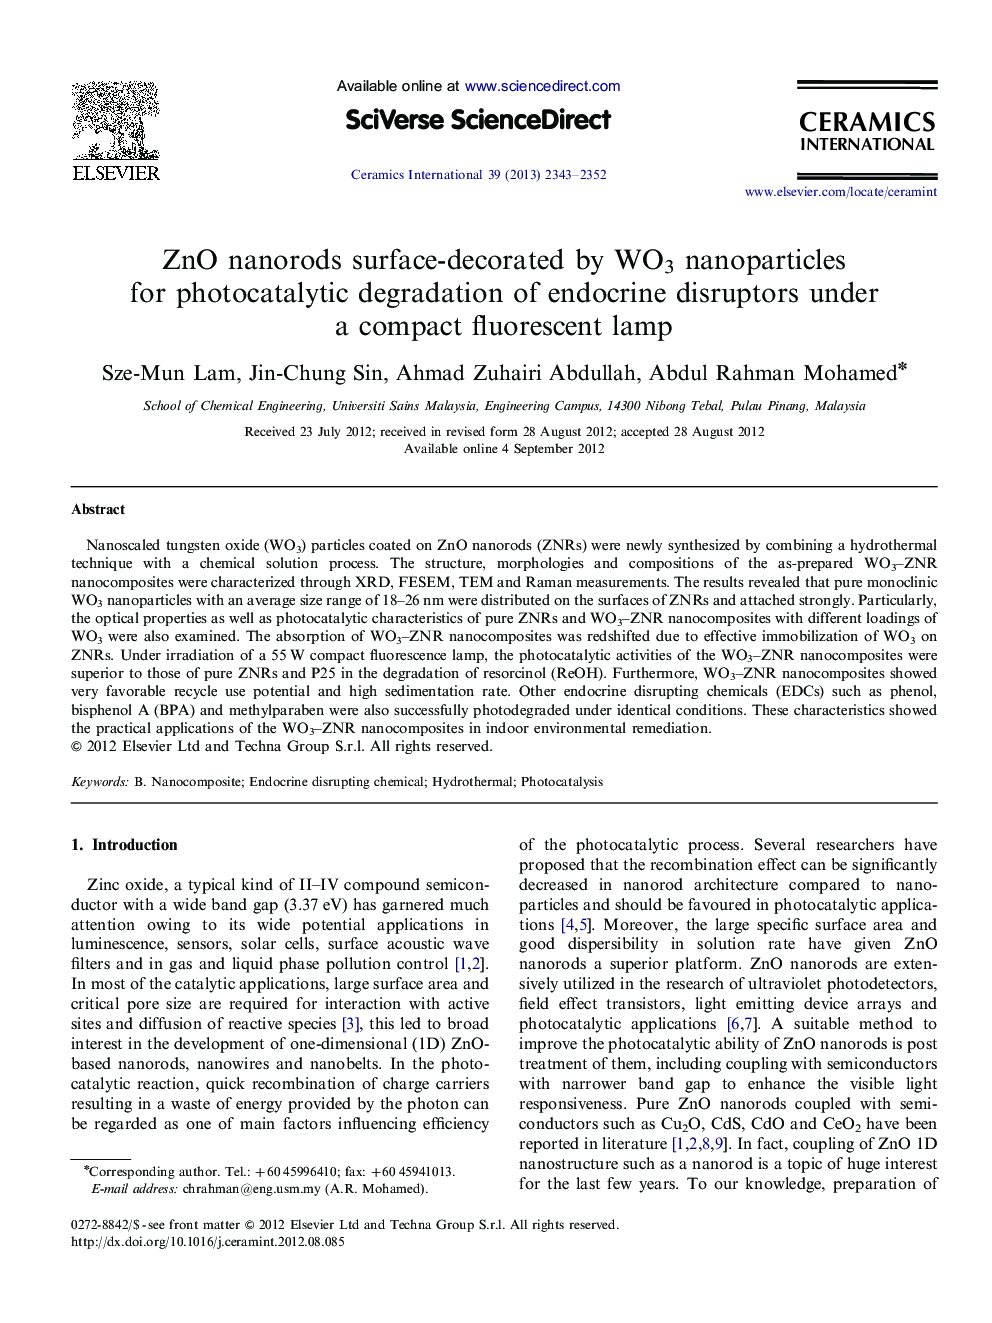 ZnO nanorods surface-decorated by WO3 nanoparticles for photocatalytic degradation of endocrine disruptors under a compact fluorescent lamp